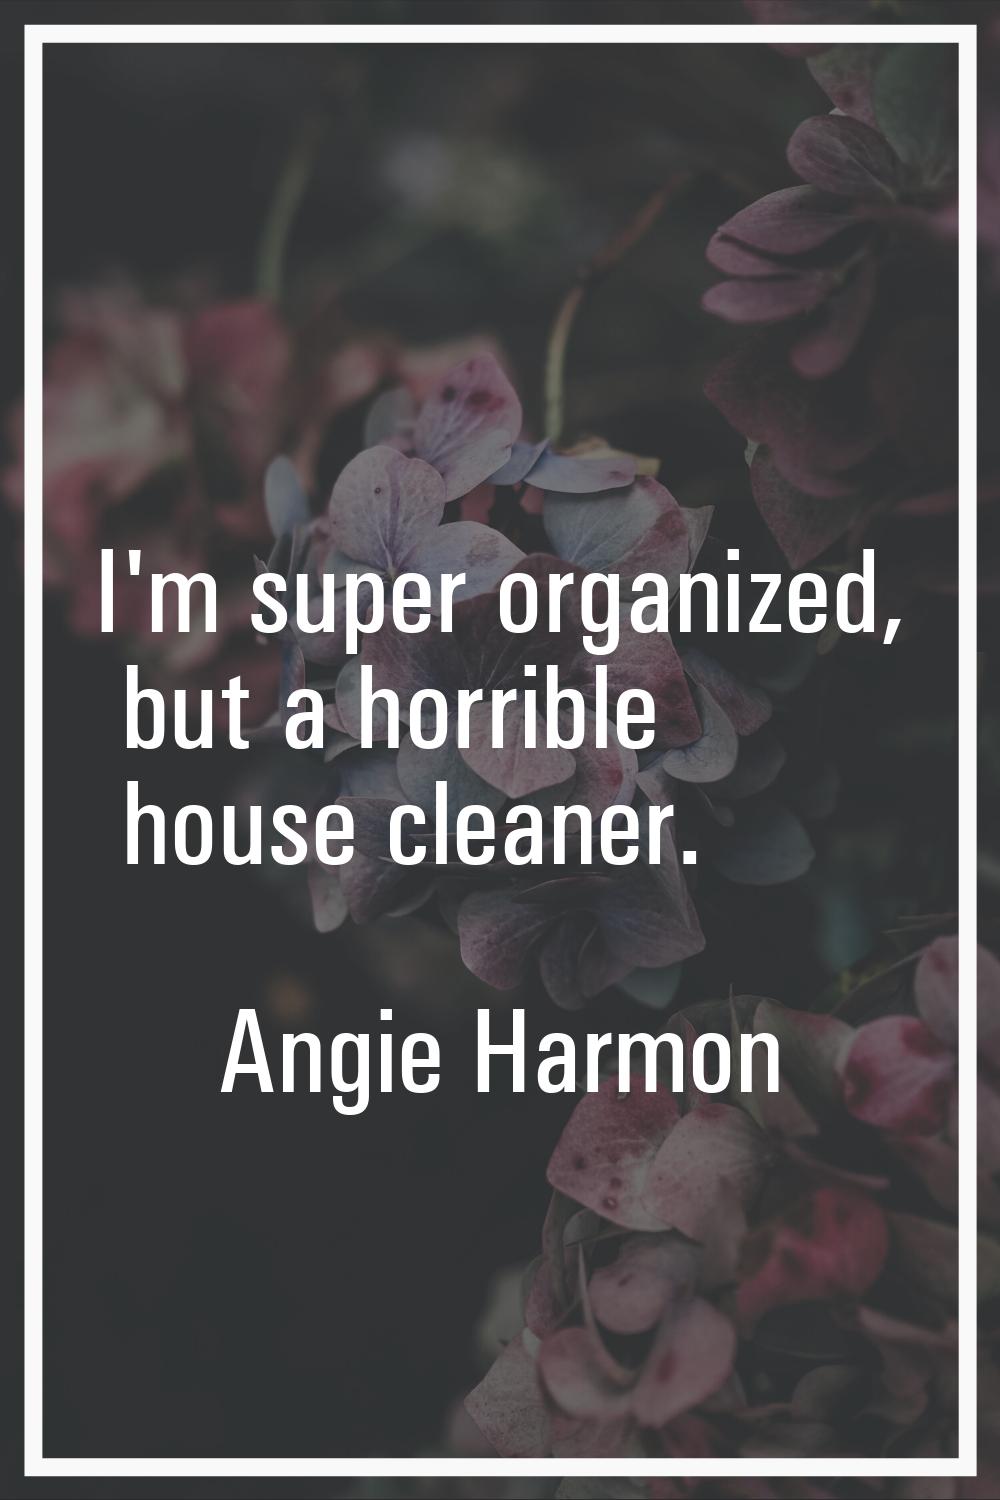 I'm super organized, but a horrible house cleaner.